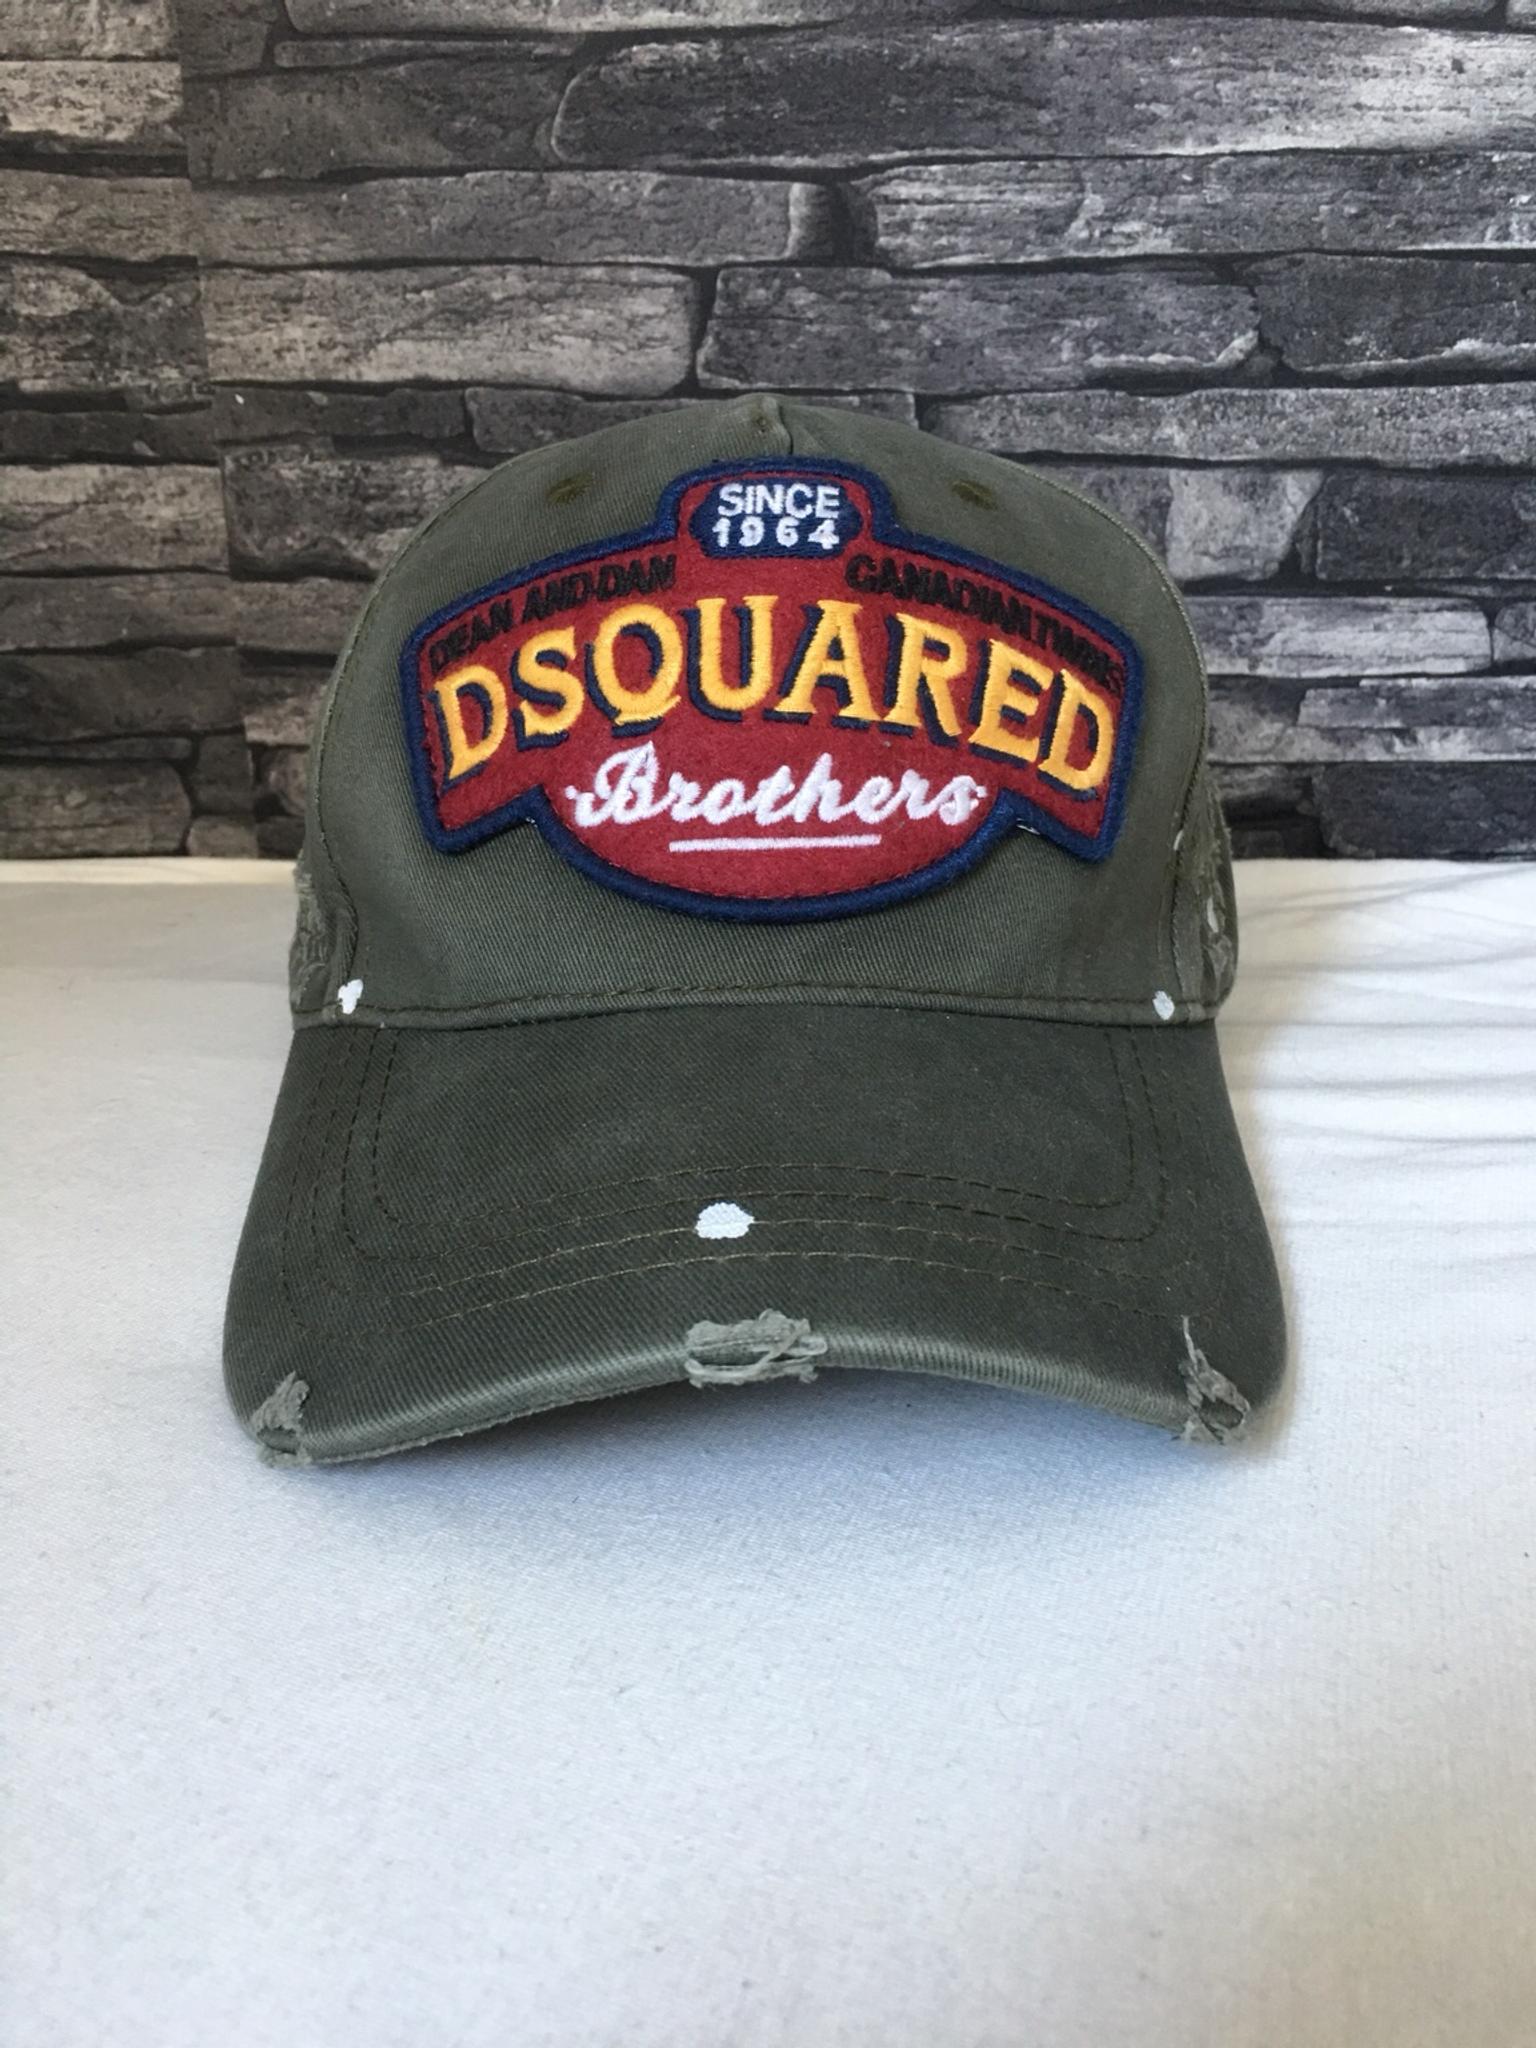 dsquared cap keep it real